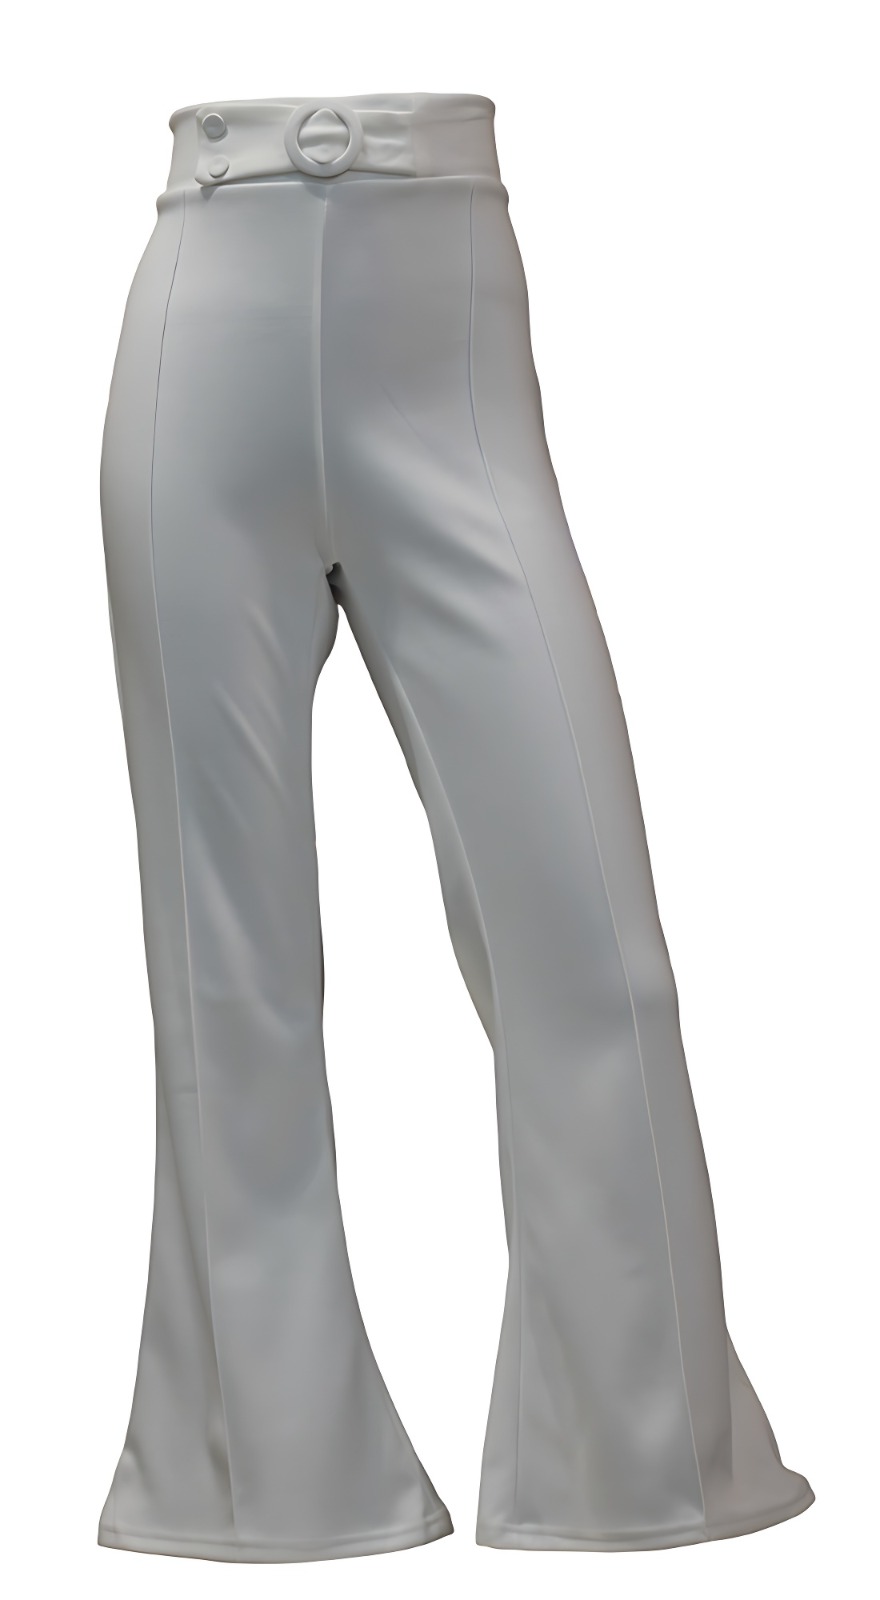 2020 Mens Flared Womens Formal Pants Outfits Pants With Bell Bottom White  Dance Suit In Size 37 42 From Ai806, $29.44 | DHgate.Com